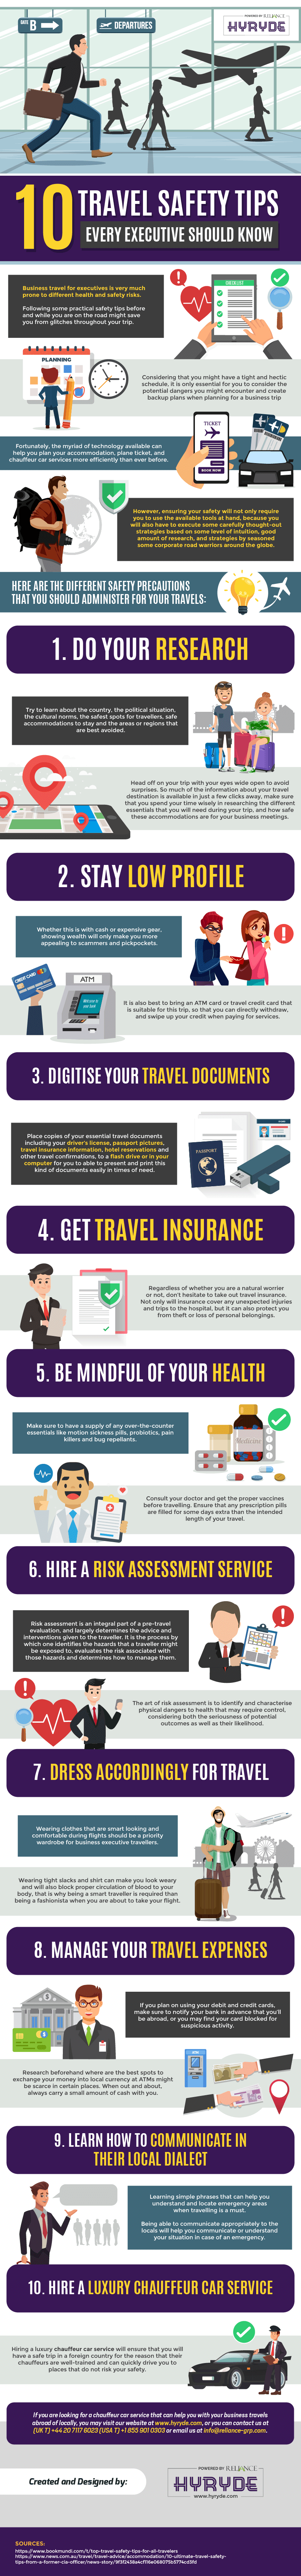 10 Travel Safety Tips Every Executive Should Know (Infographic